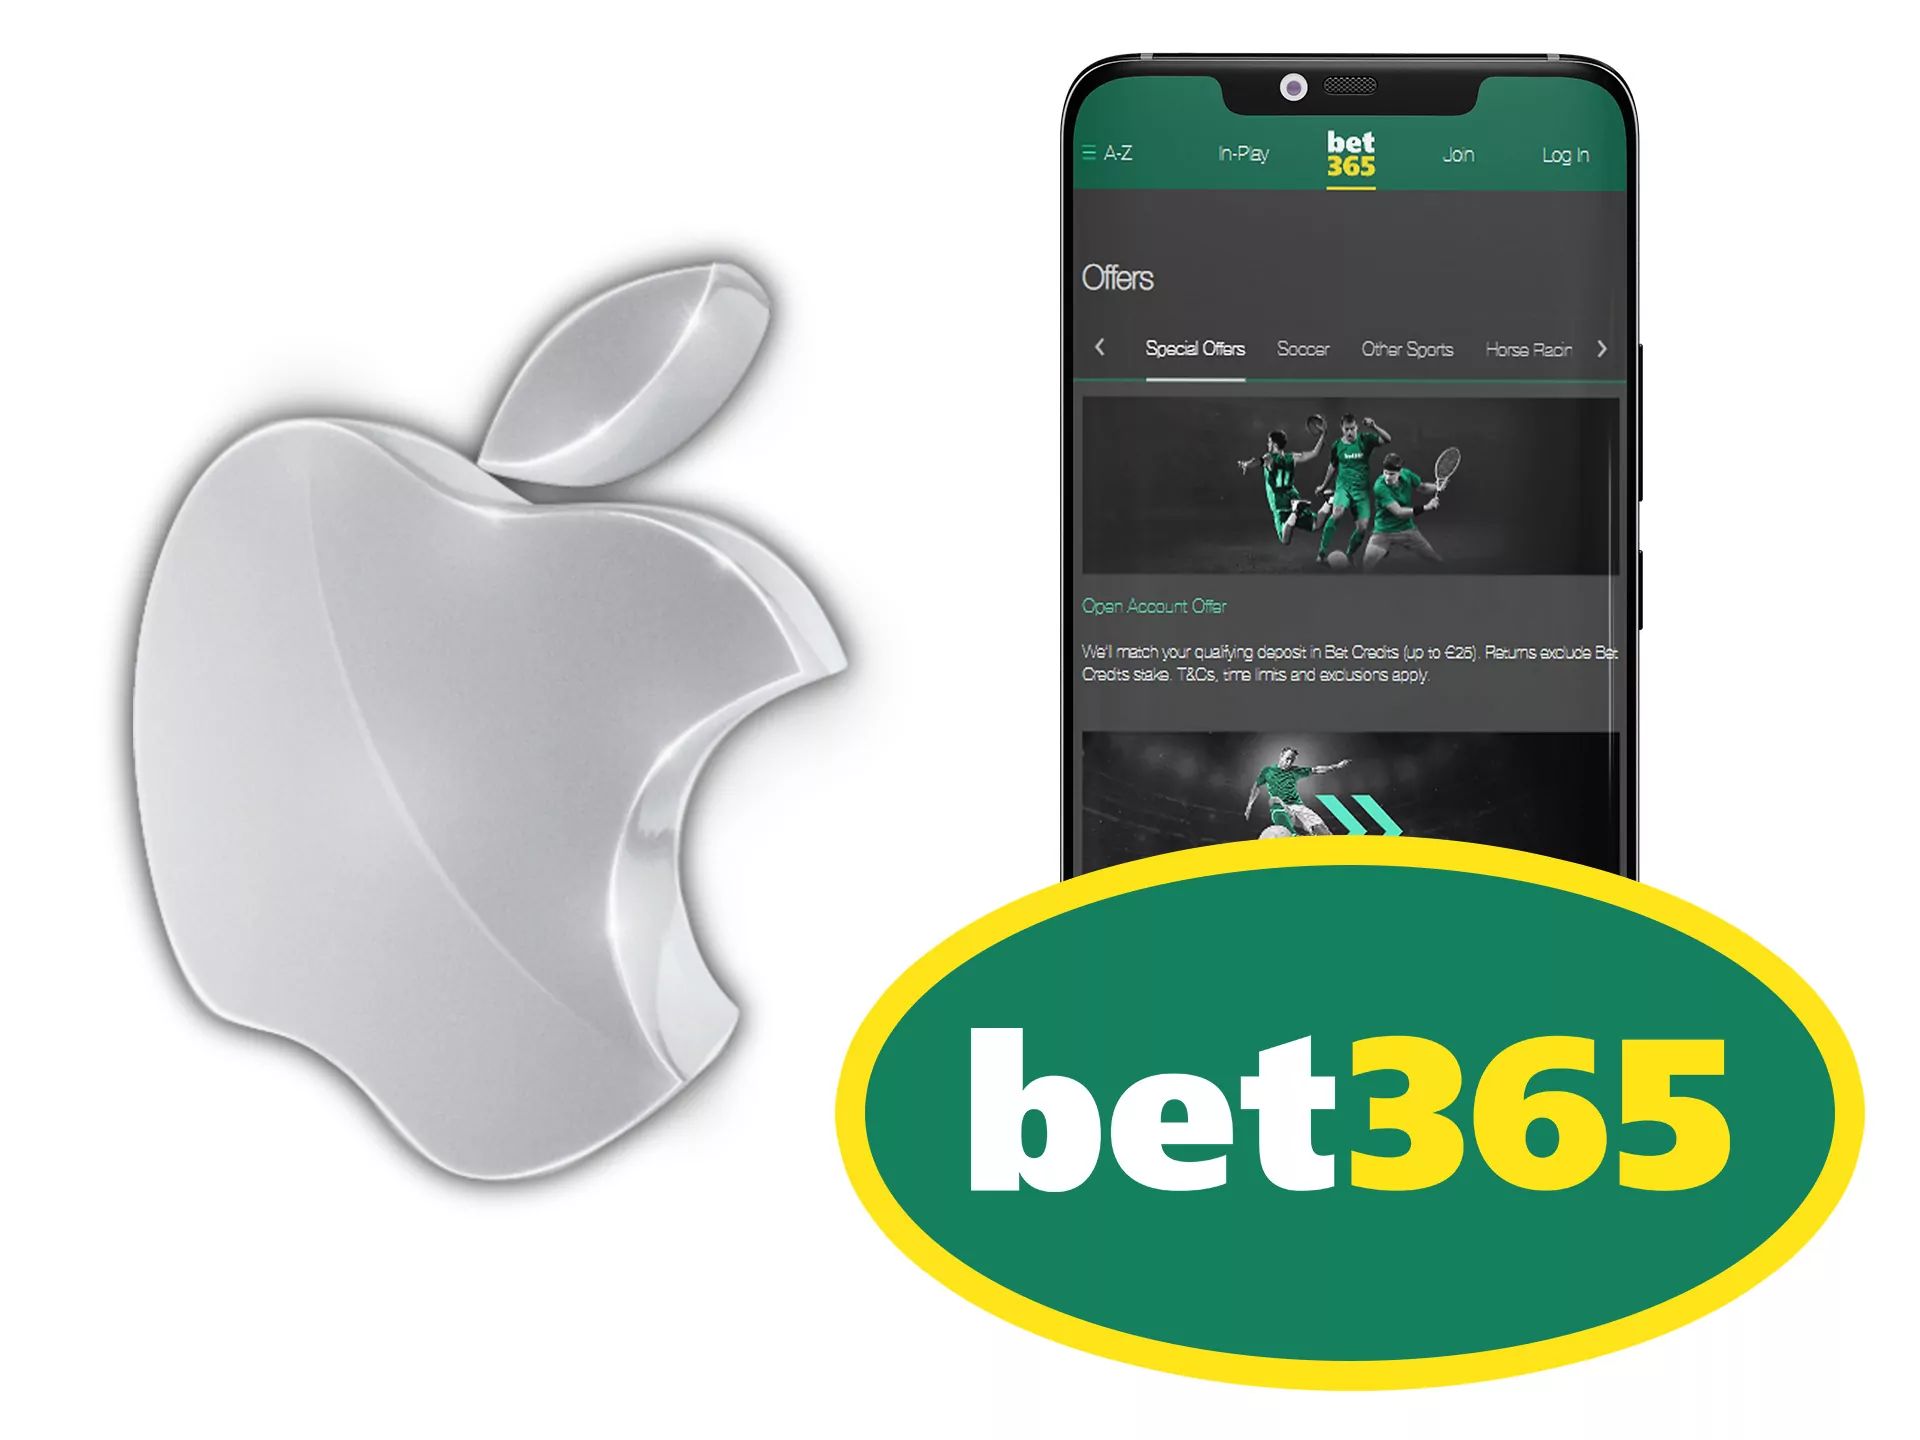 Bet365 app supports most of Apple devices.